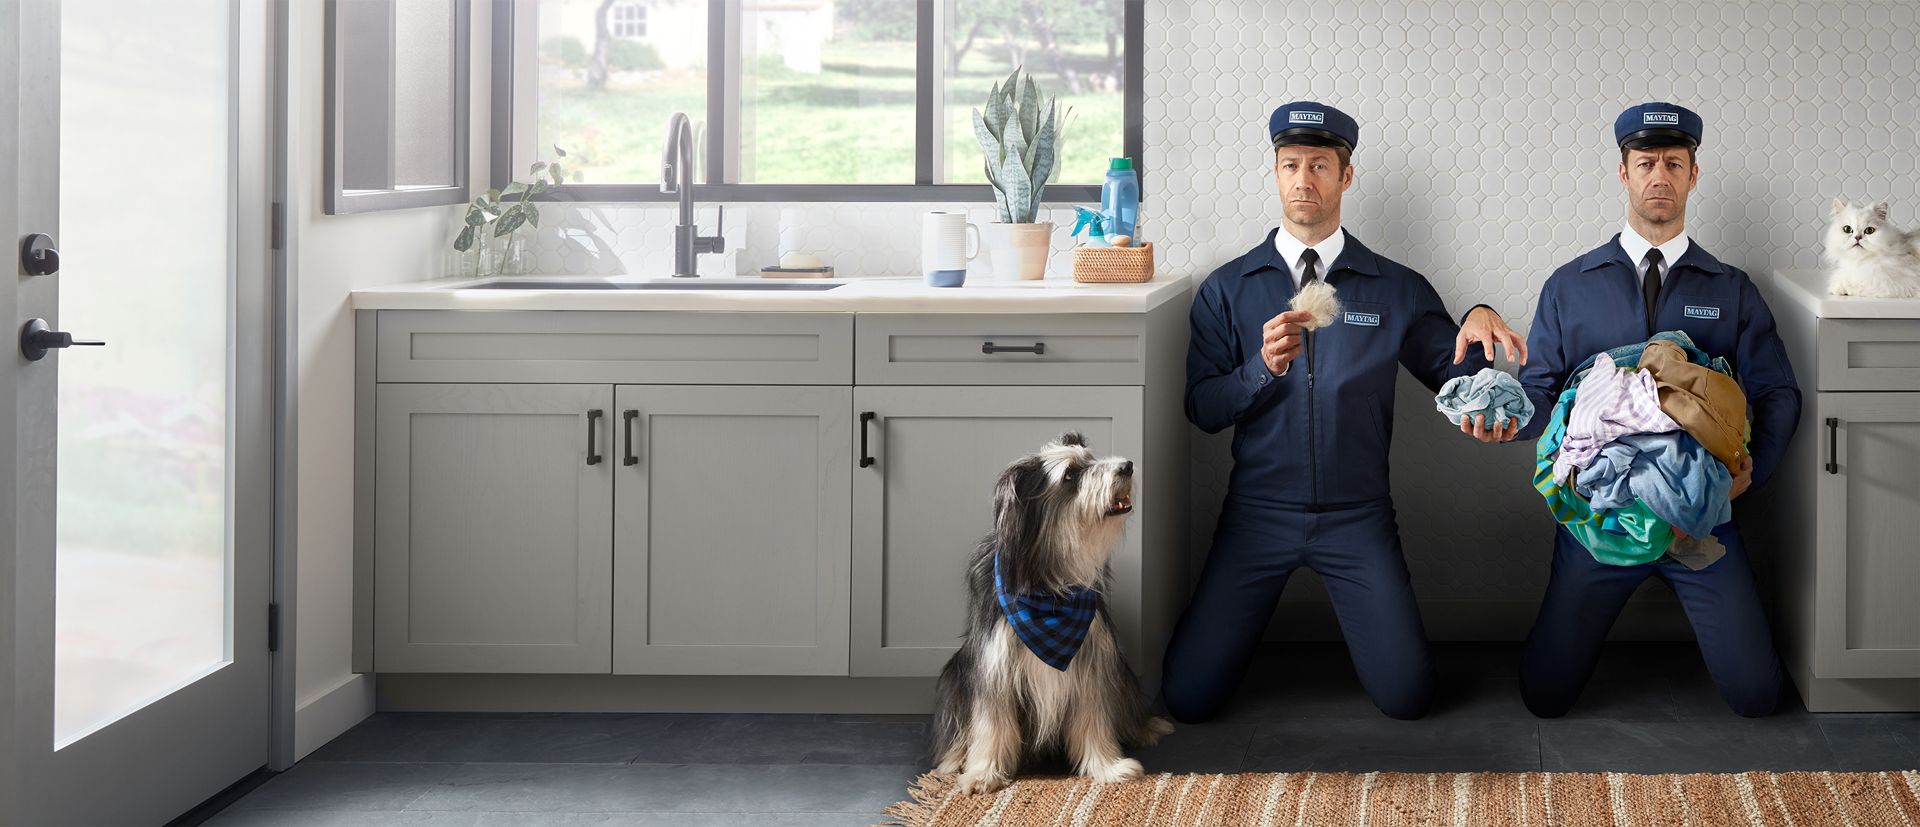 The Maytag® man holding a furball and tumbling clothes in a laundry room.